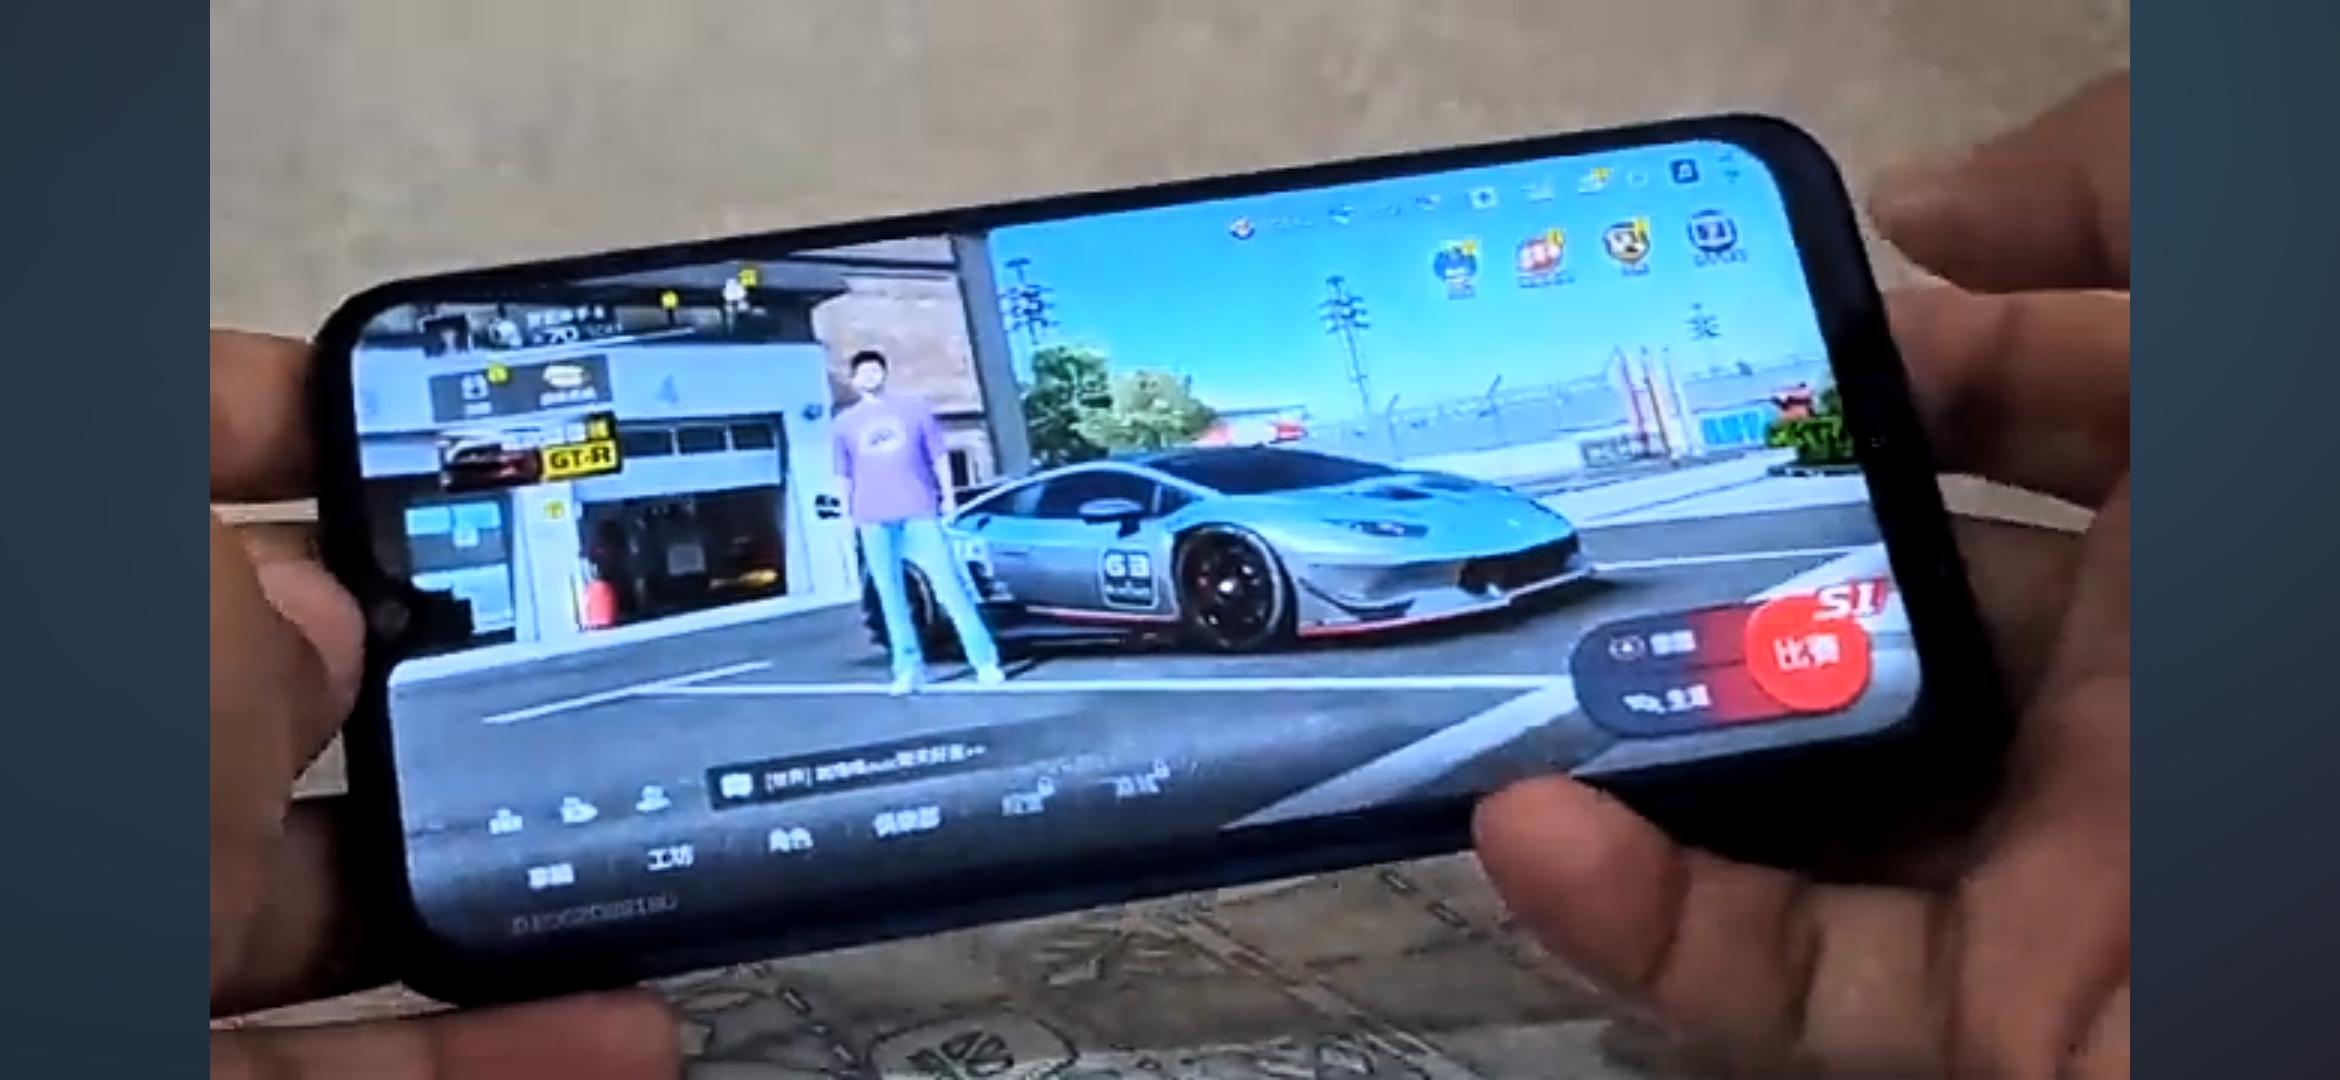 Install and Run Asphalt 9: Legends on Android/iOS Right Now! [Guide] -  TechPP